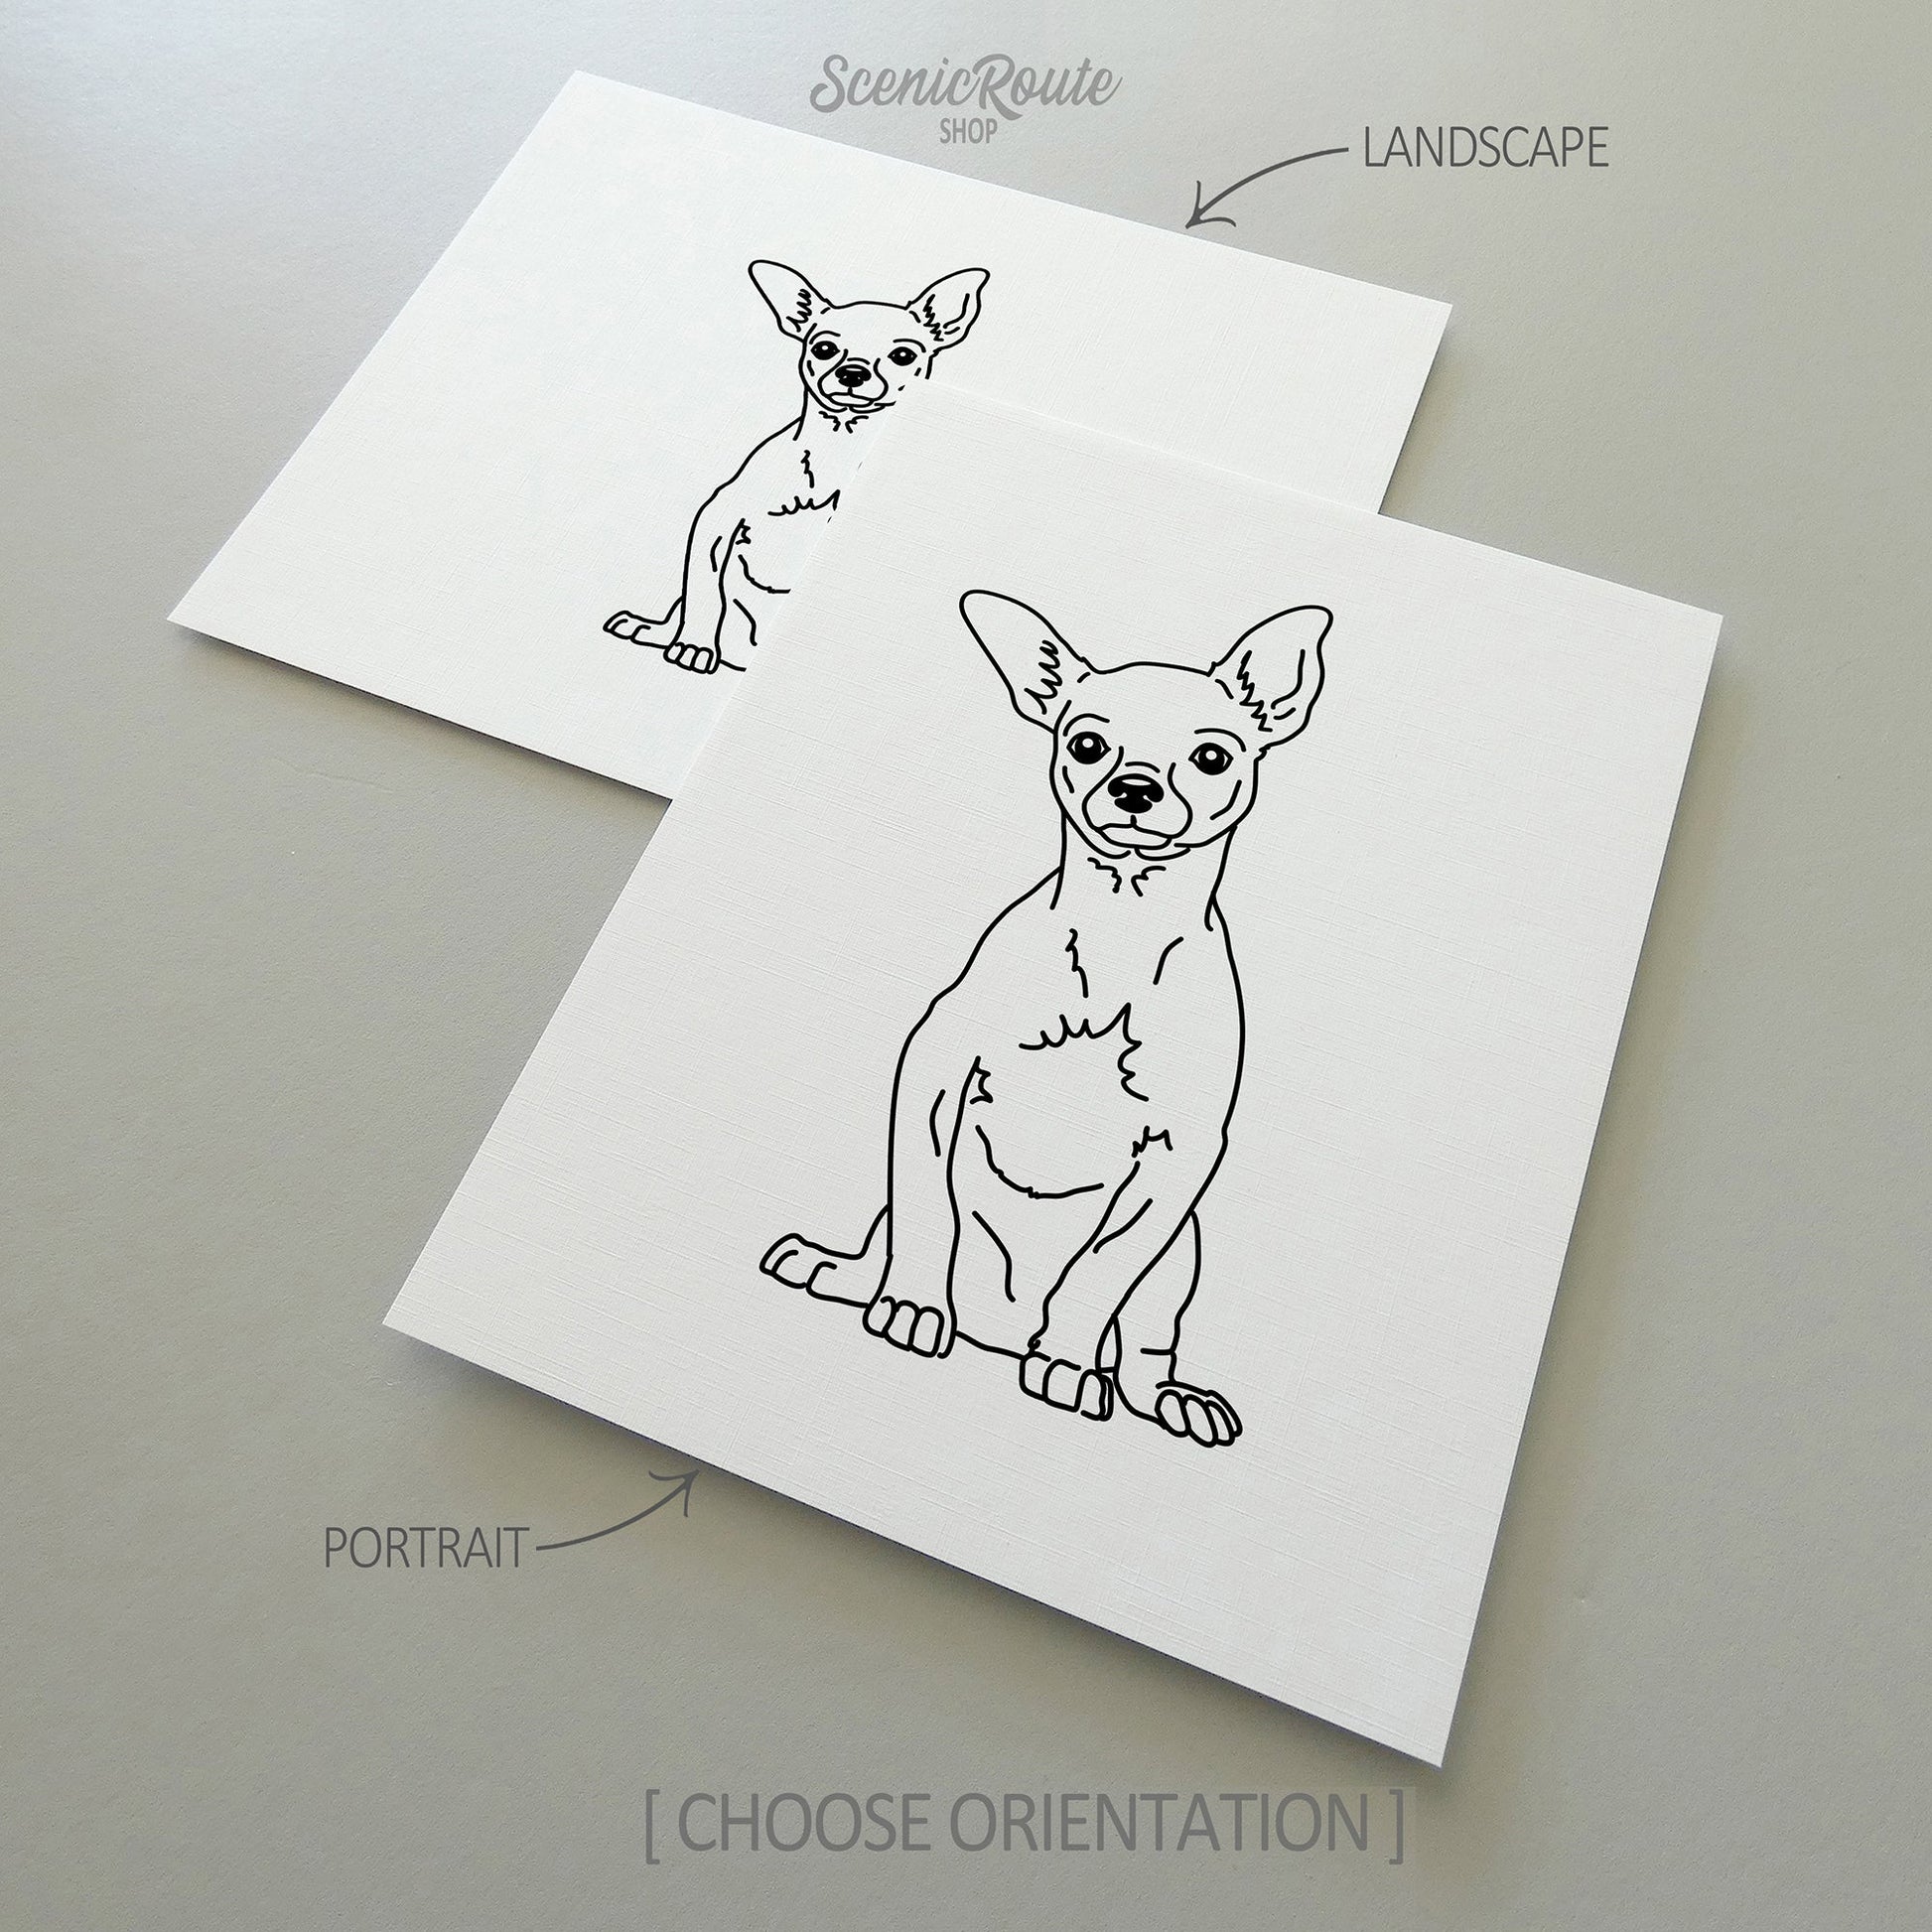 Two drawings of a Chihuahua dog on white linen paper with a gray background.  Pieces are shown in portrait and landscape orientation options to illustrate the available art print options.